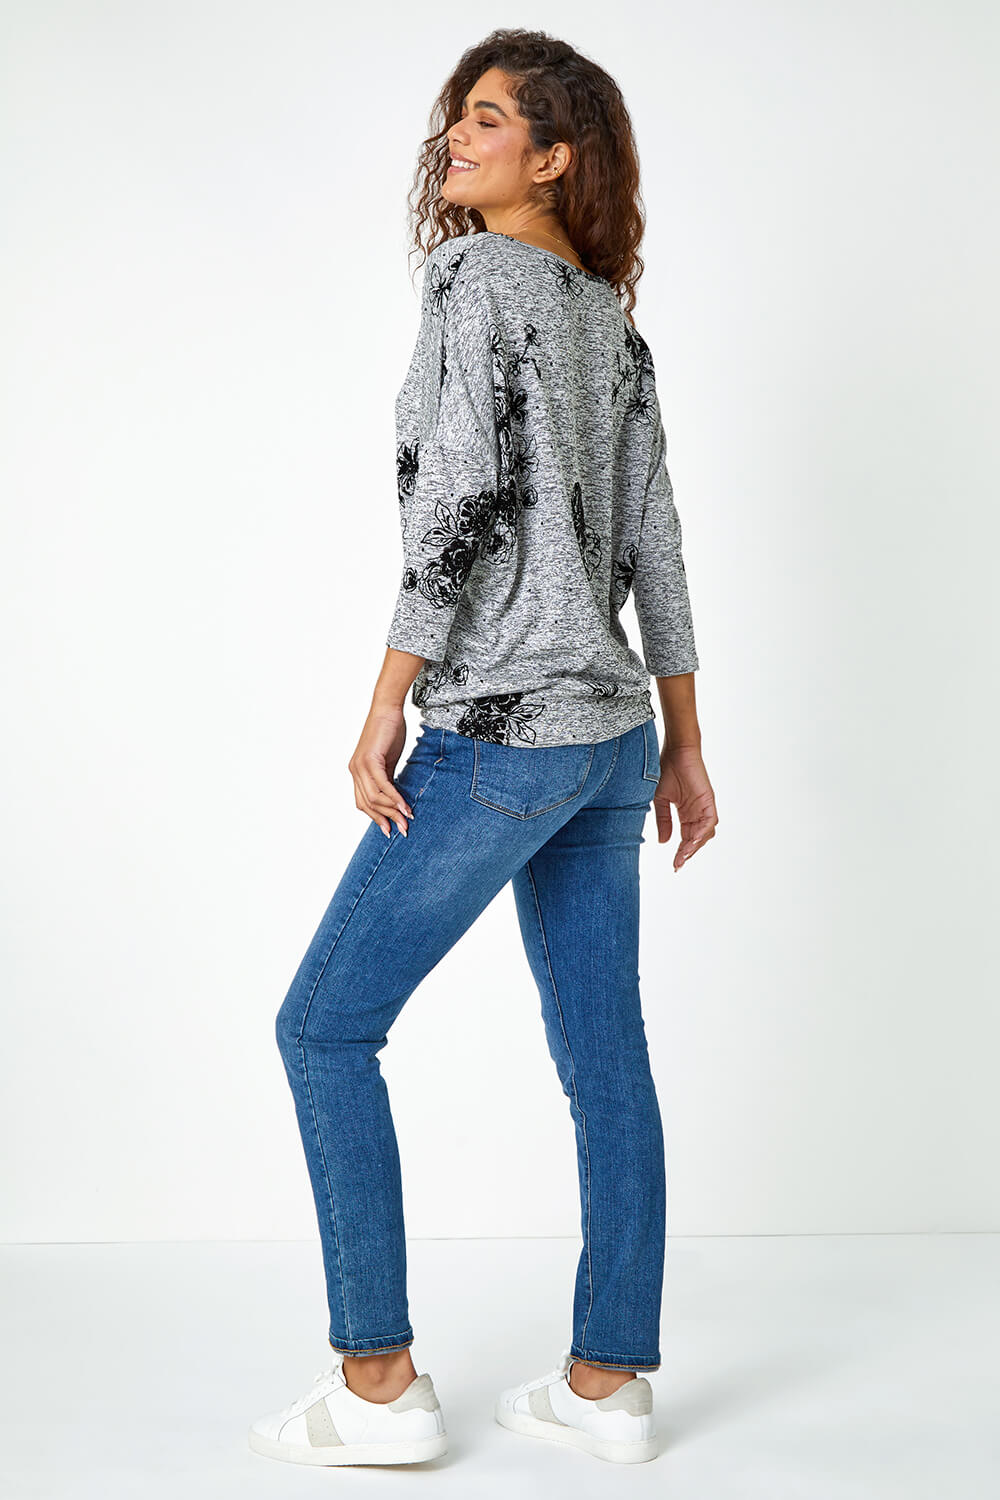 Grey Textured Floral Print Stretch Top, Image 3 of 5